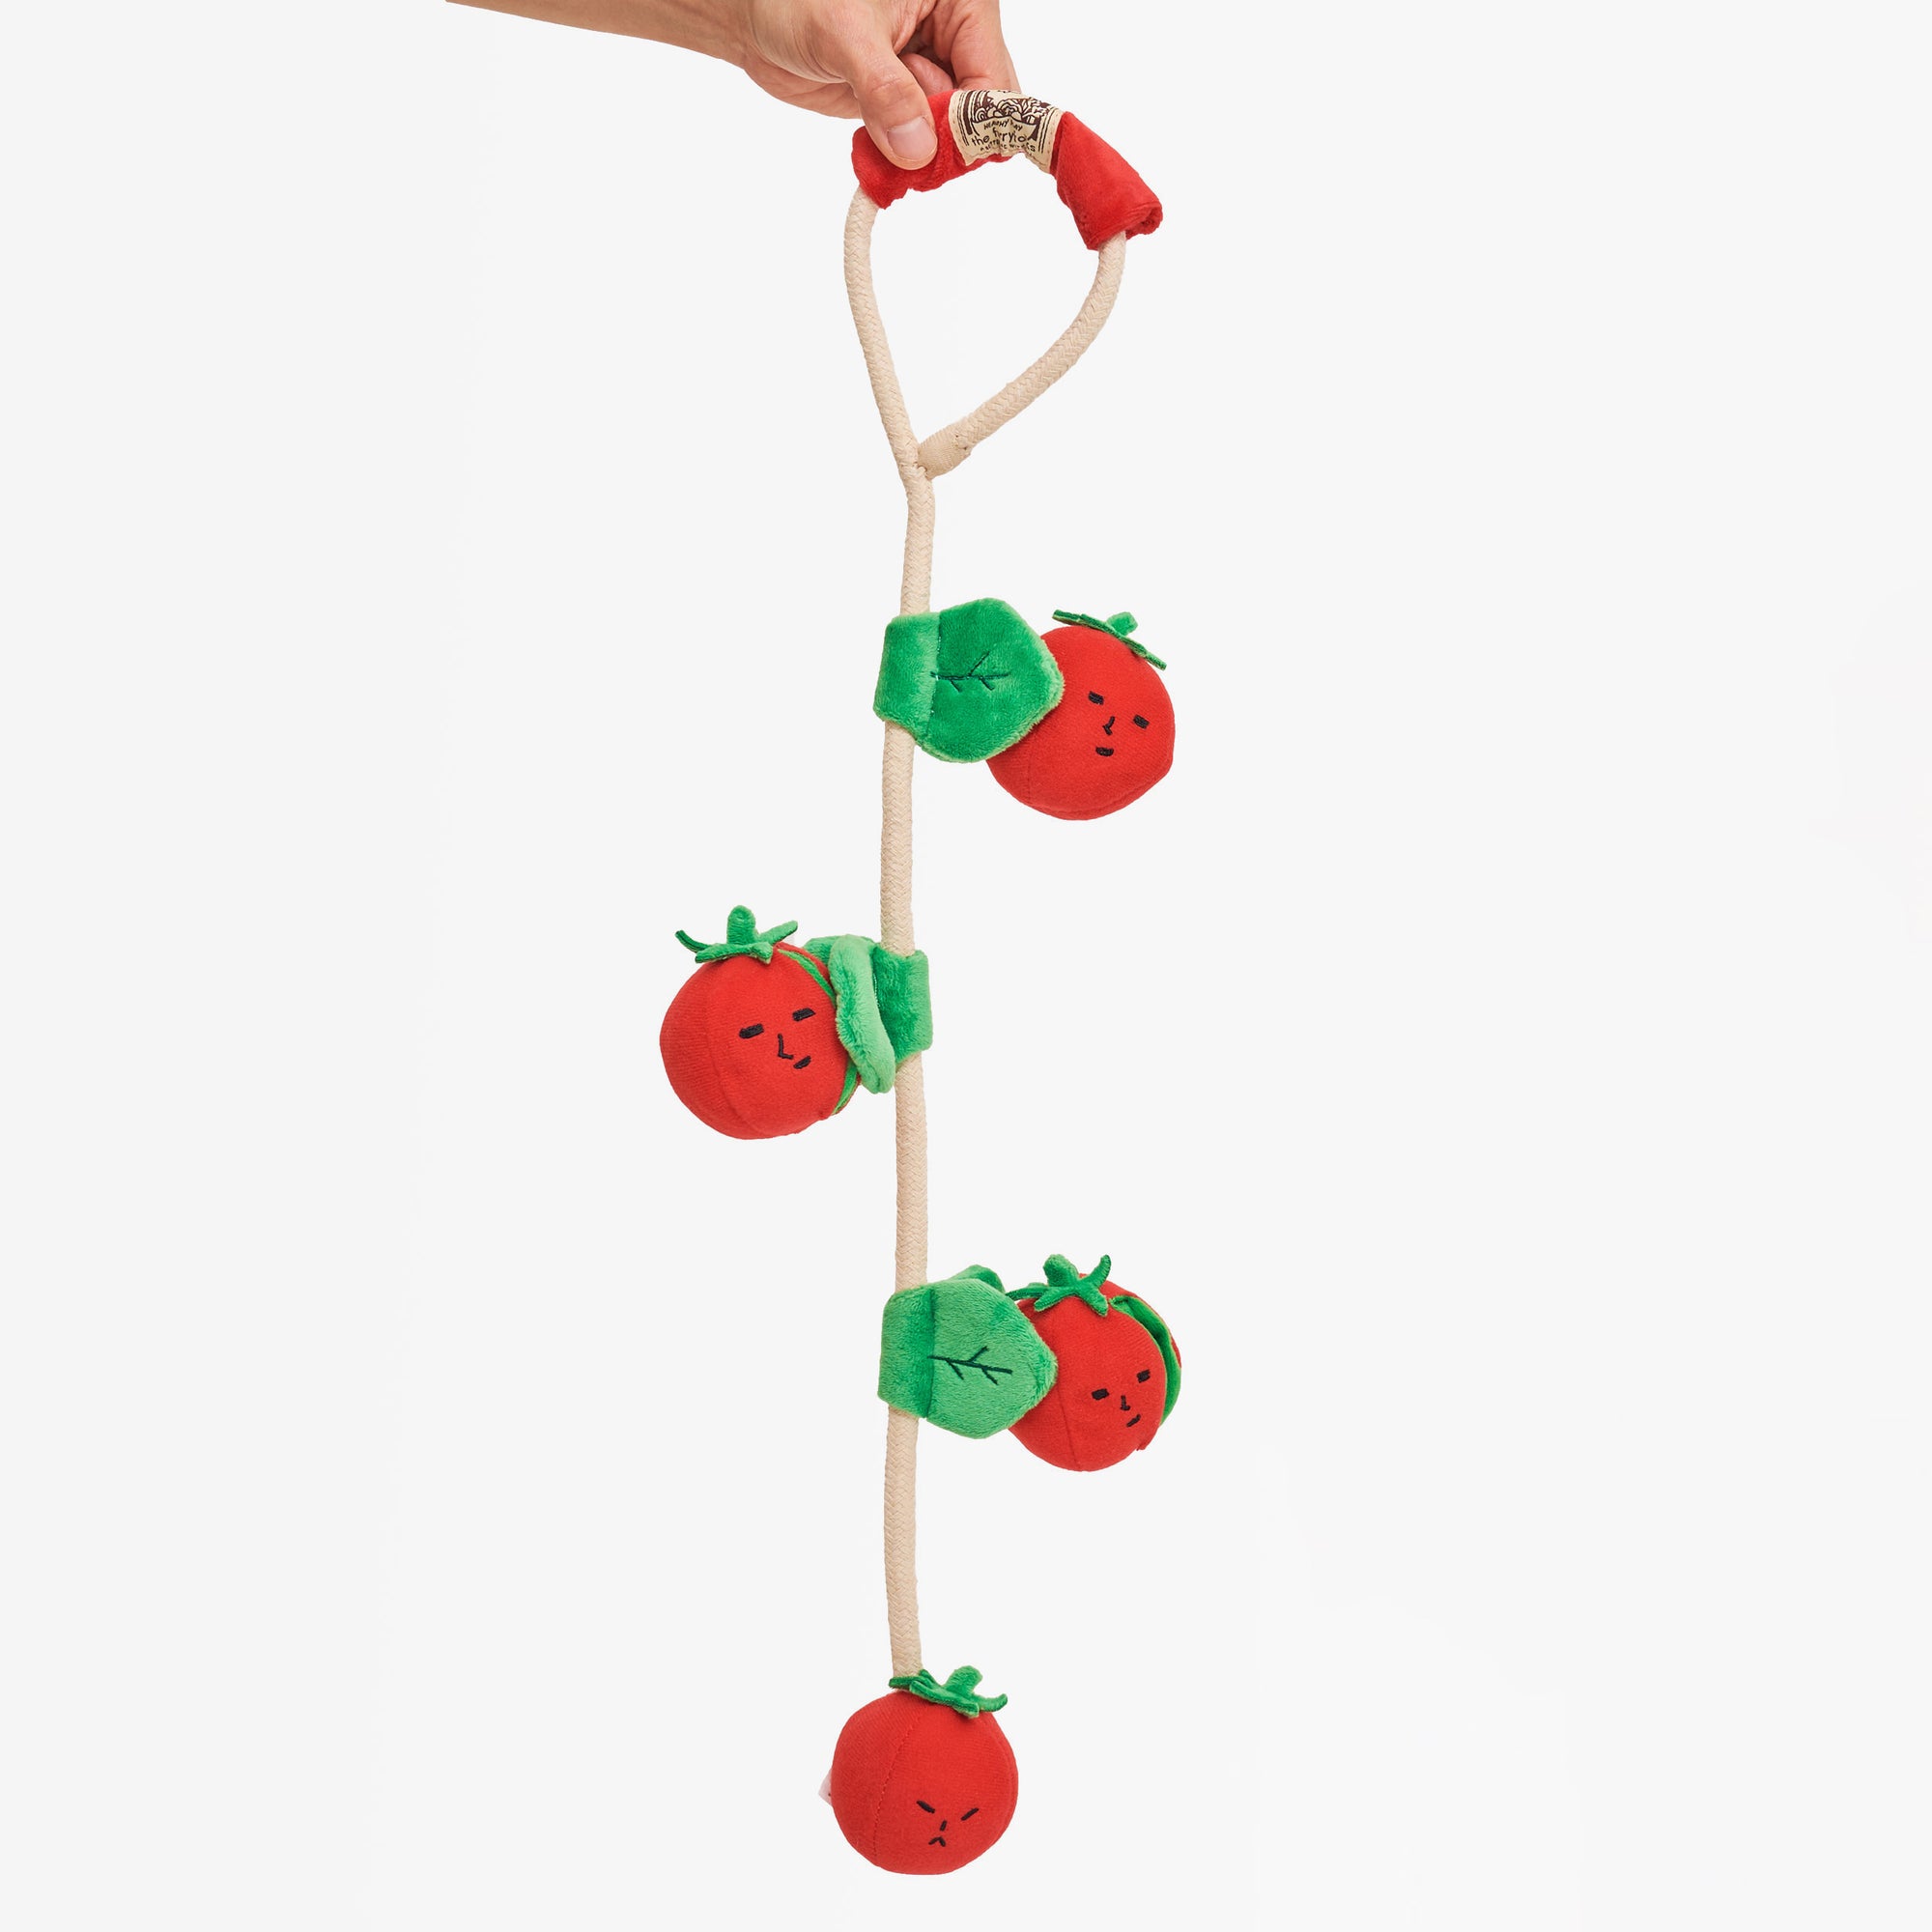 This is a playful toy featuring a string of plush tomatoes, each with a cute face. The tomatoes are suspended on a vertical rope and are alternately oriented with the top and bottom of the tomatoes facing upwards. The toy appears to be handmade, with a fabric loop at the top for hanging, and it would likely be a delightful decoration or a soft plaything.